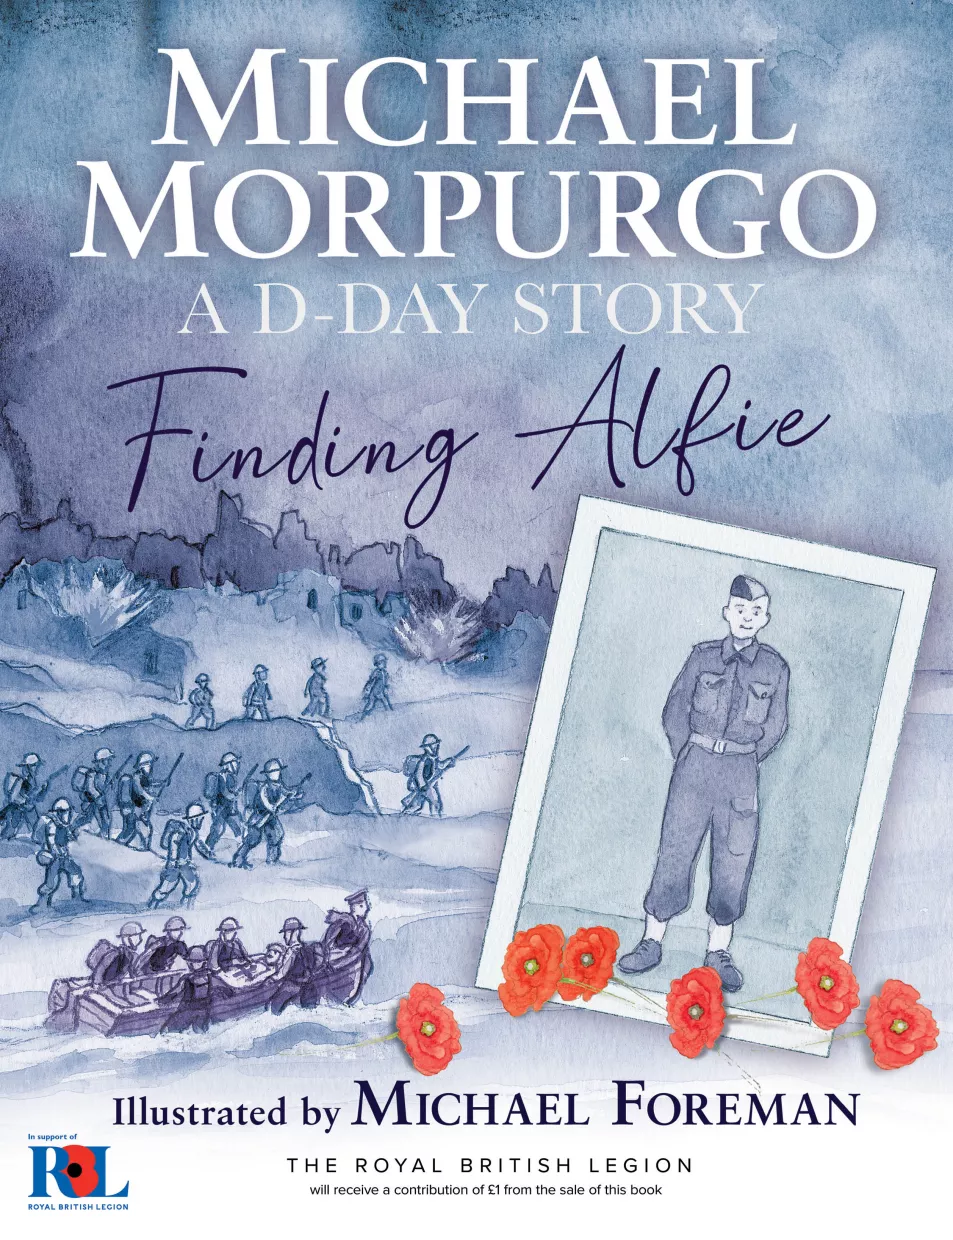 Finding Alfie: A D-Day Story by Michael Morpurgo, illustrated by Michael Foreman